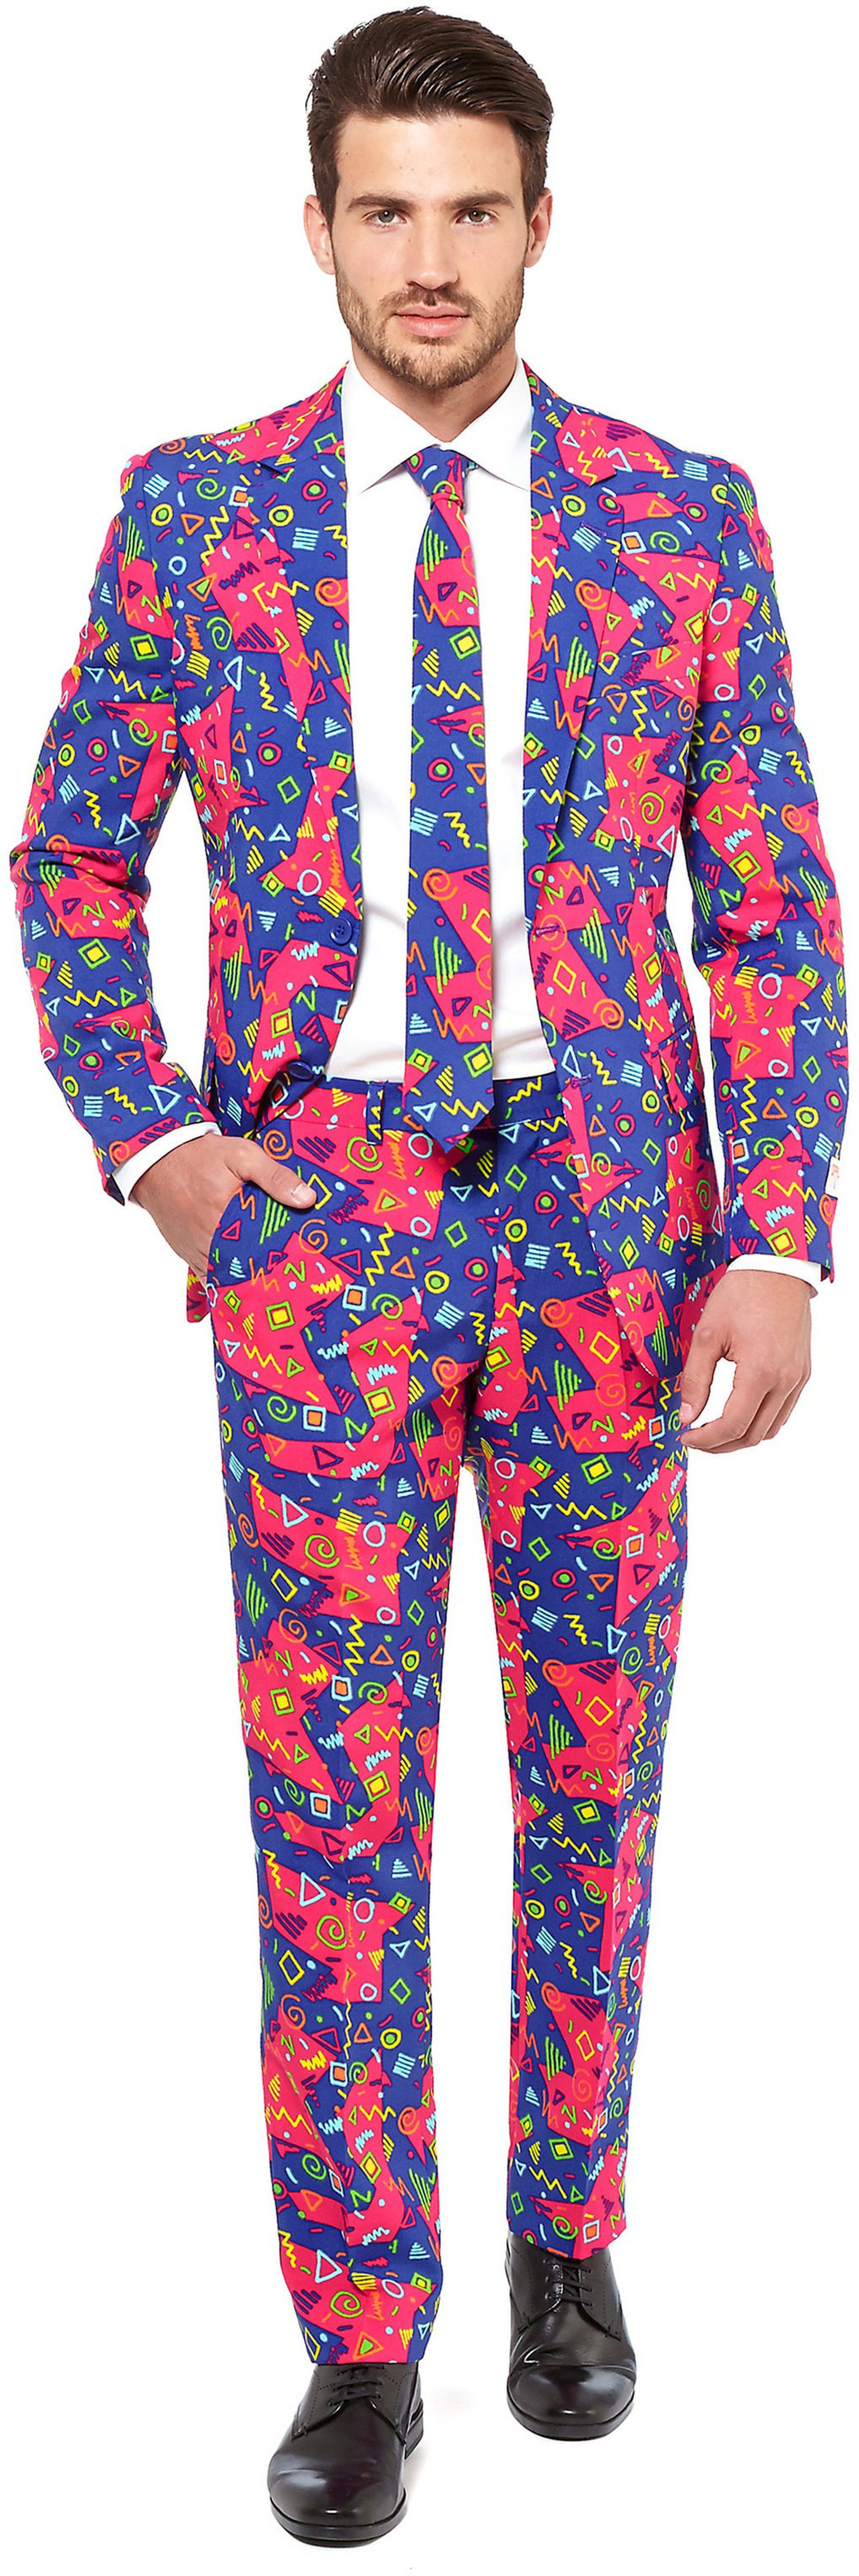 OppoSuits The Fresh Prince Suit Purple Pink size 40-R